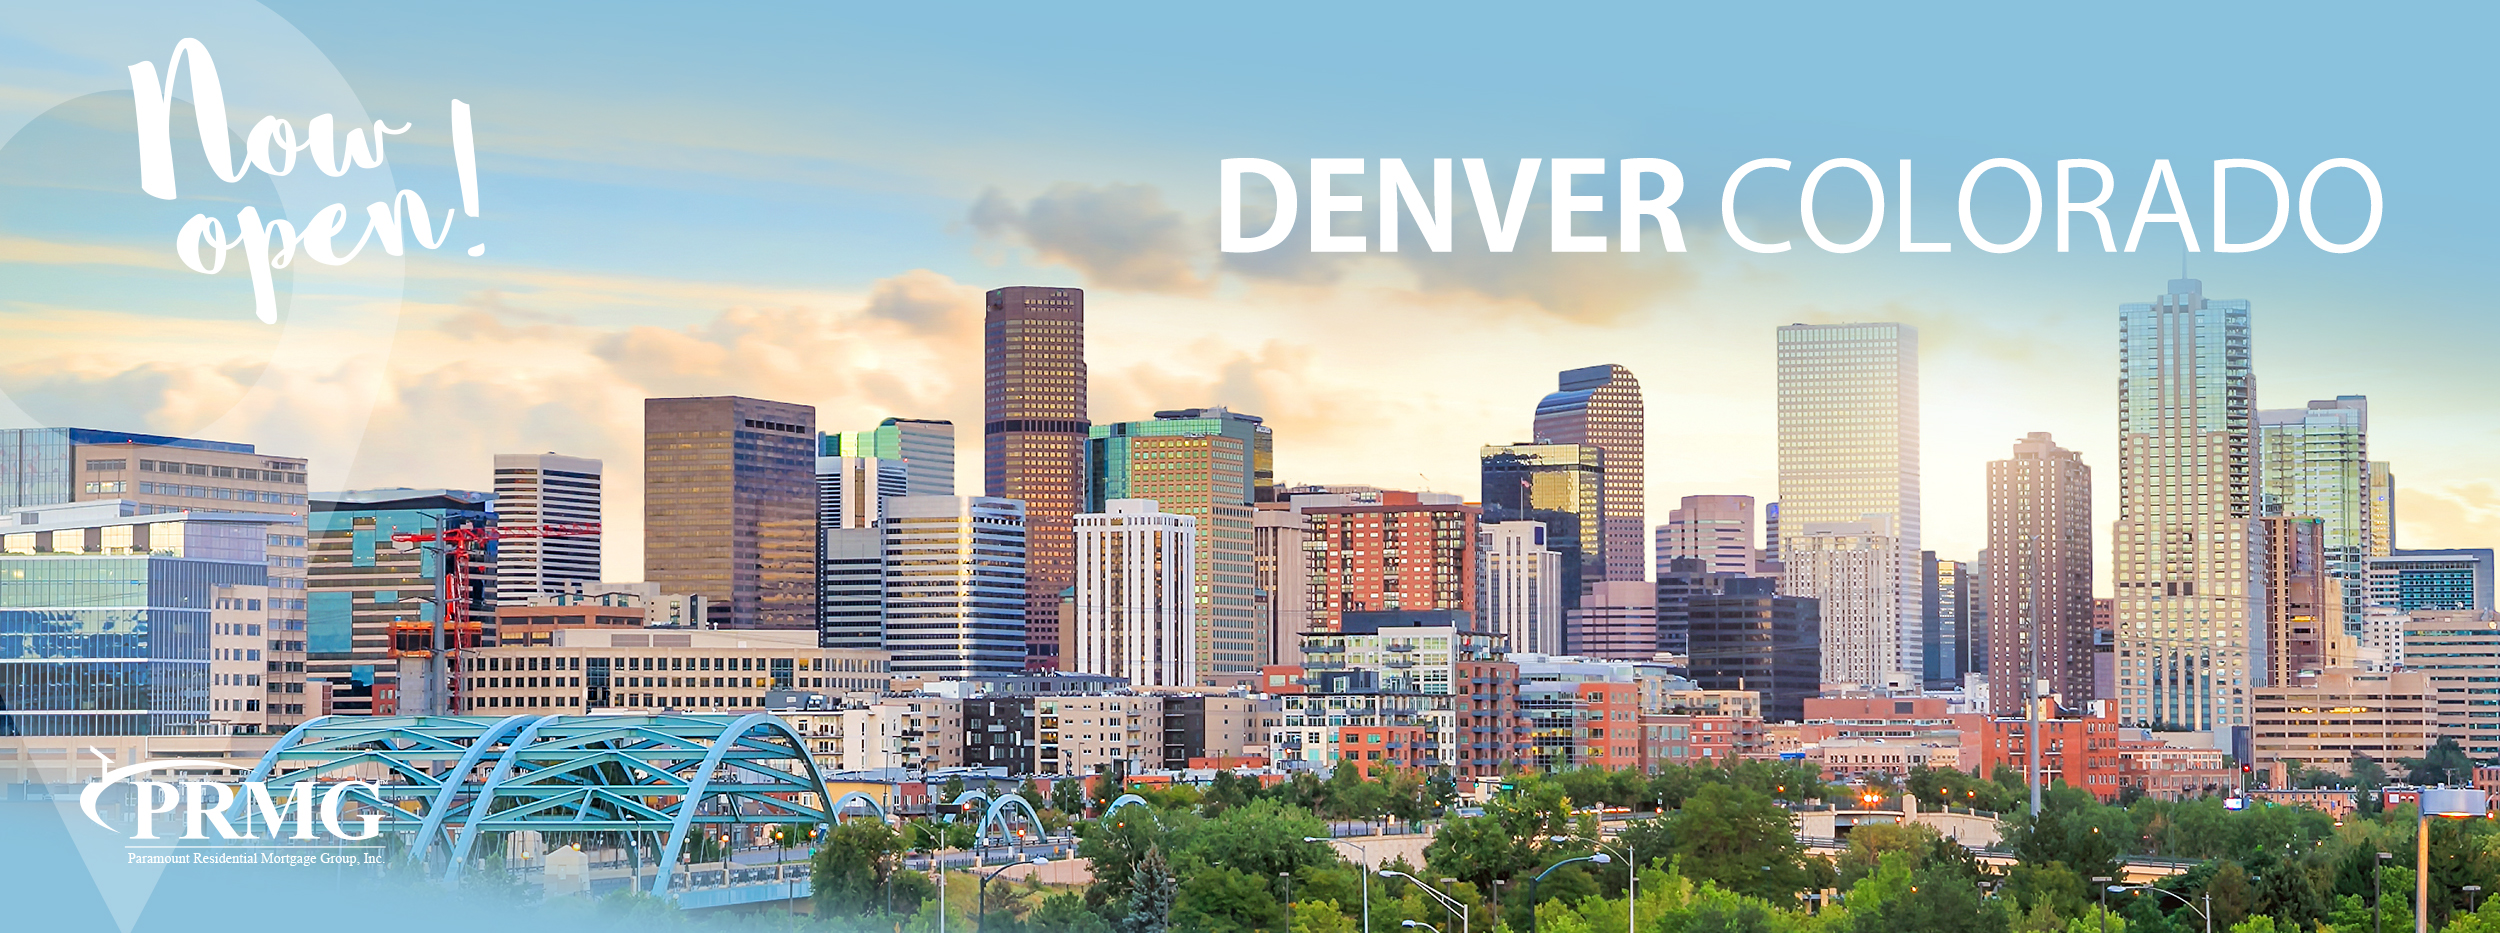 Prmg Expands Its Central Region With New Retail Branch In Denver